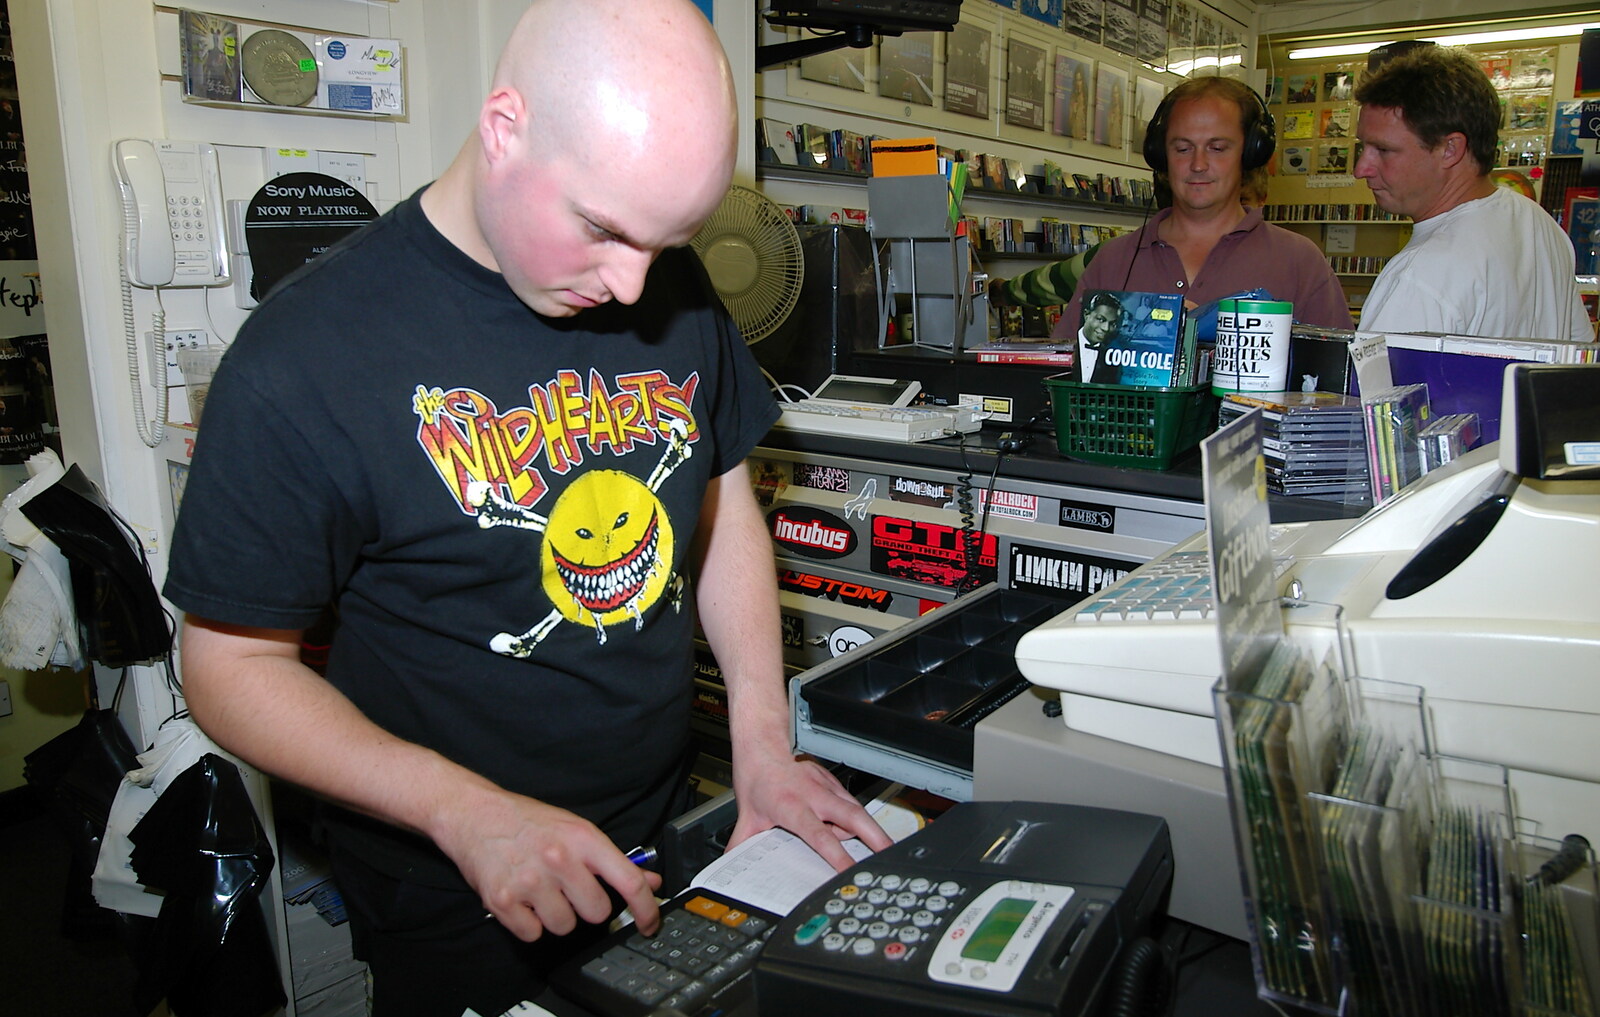 Mark on the till from Richard Panton's Van and Alex Hill at Revolution Records, Diss and Cambridge - 29th July 2005